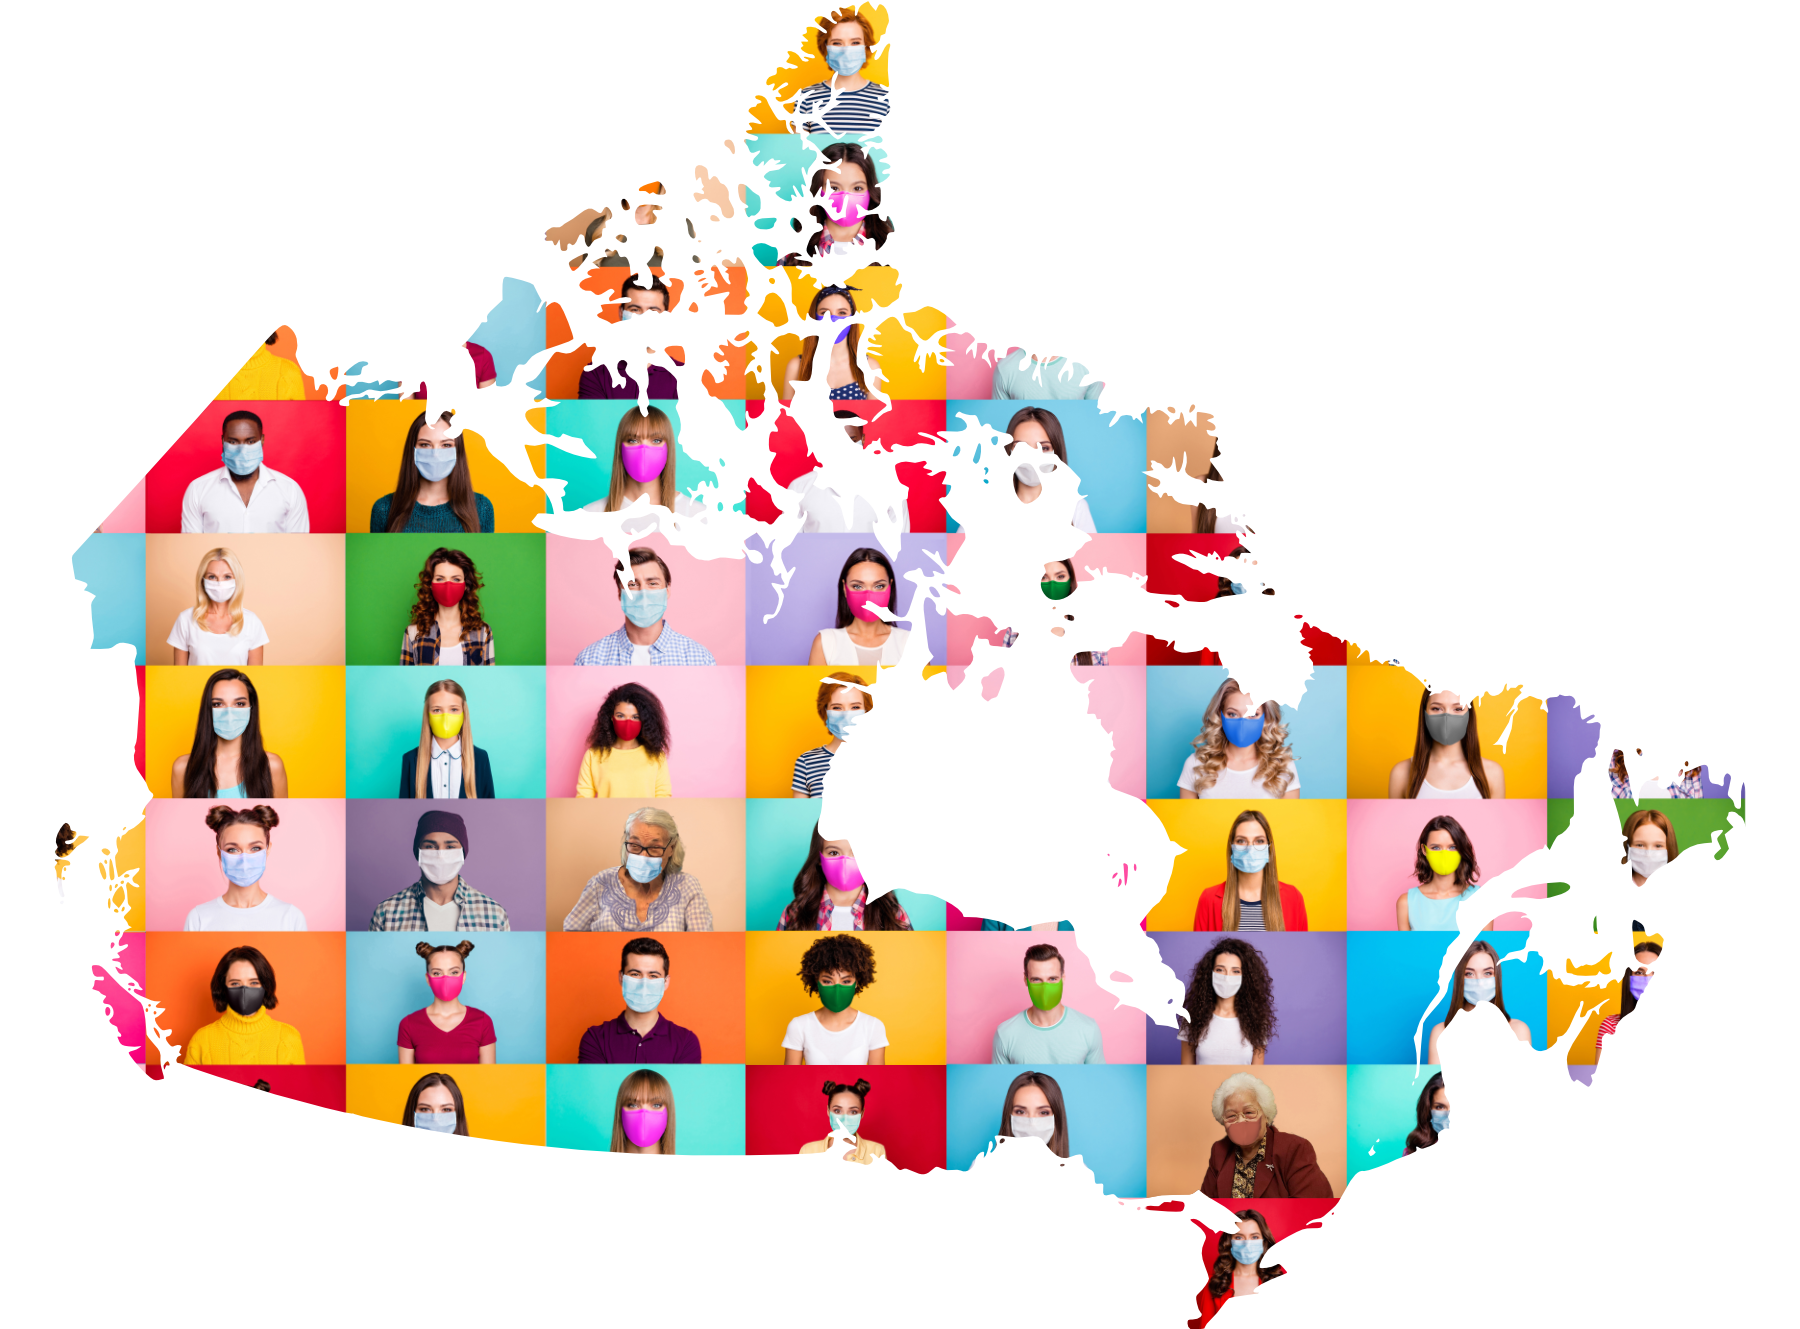 Diverse Canadians wearing protective masks displayed on map of Canada